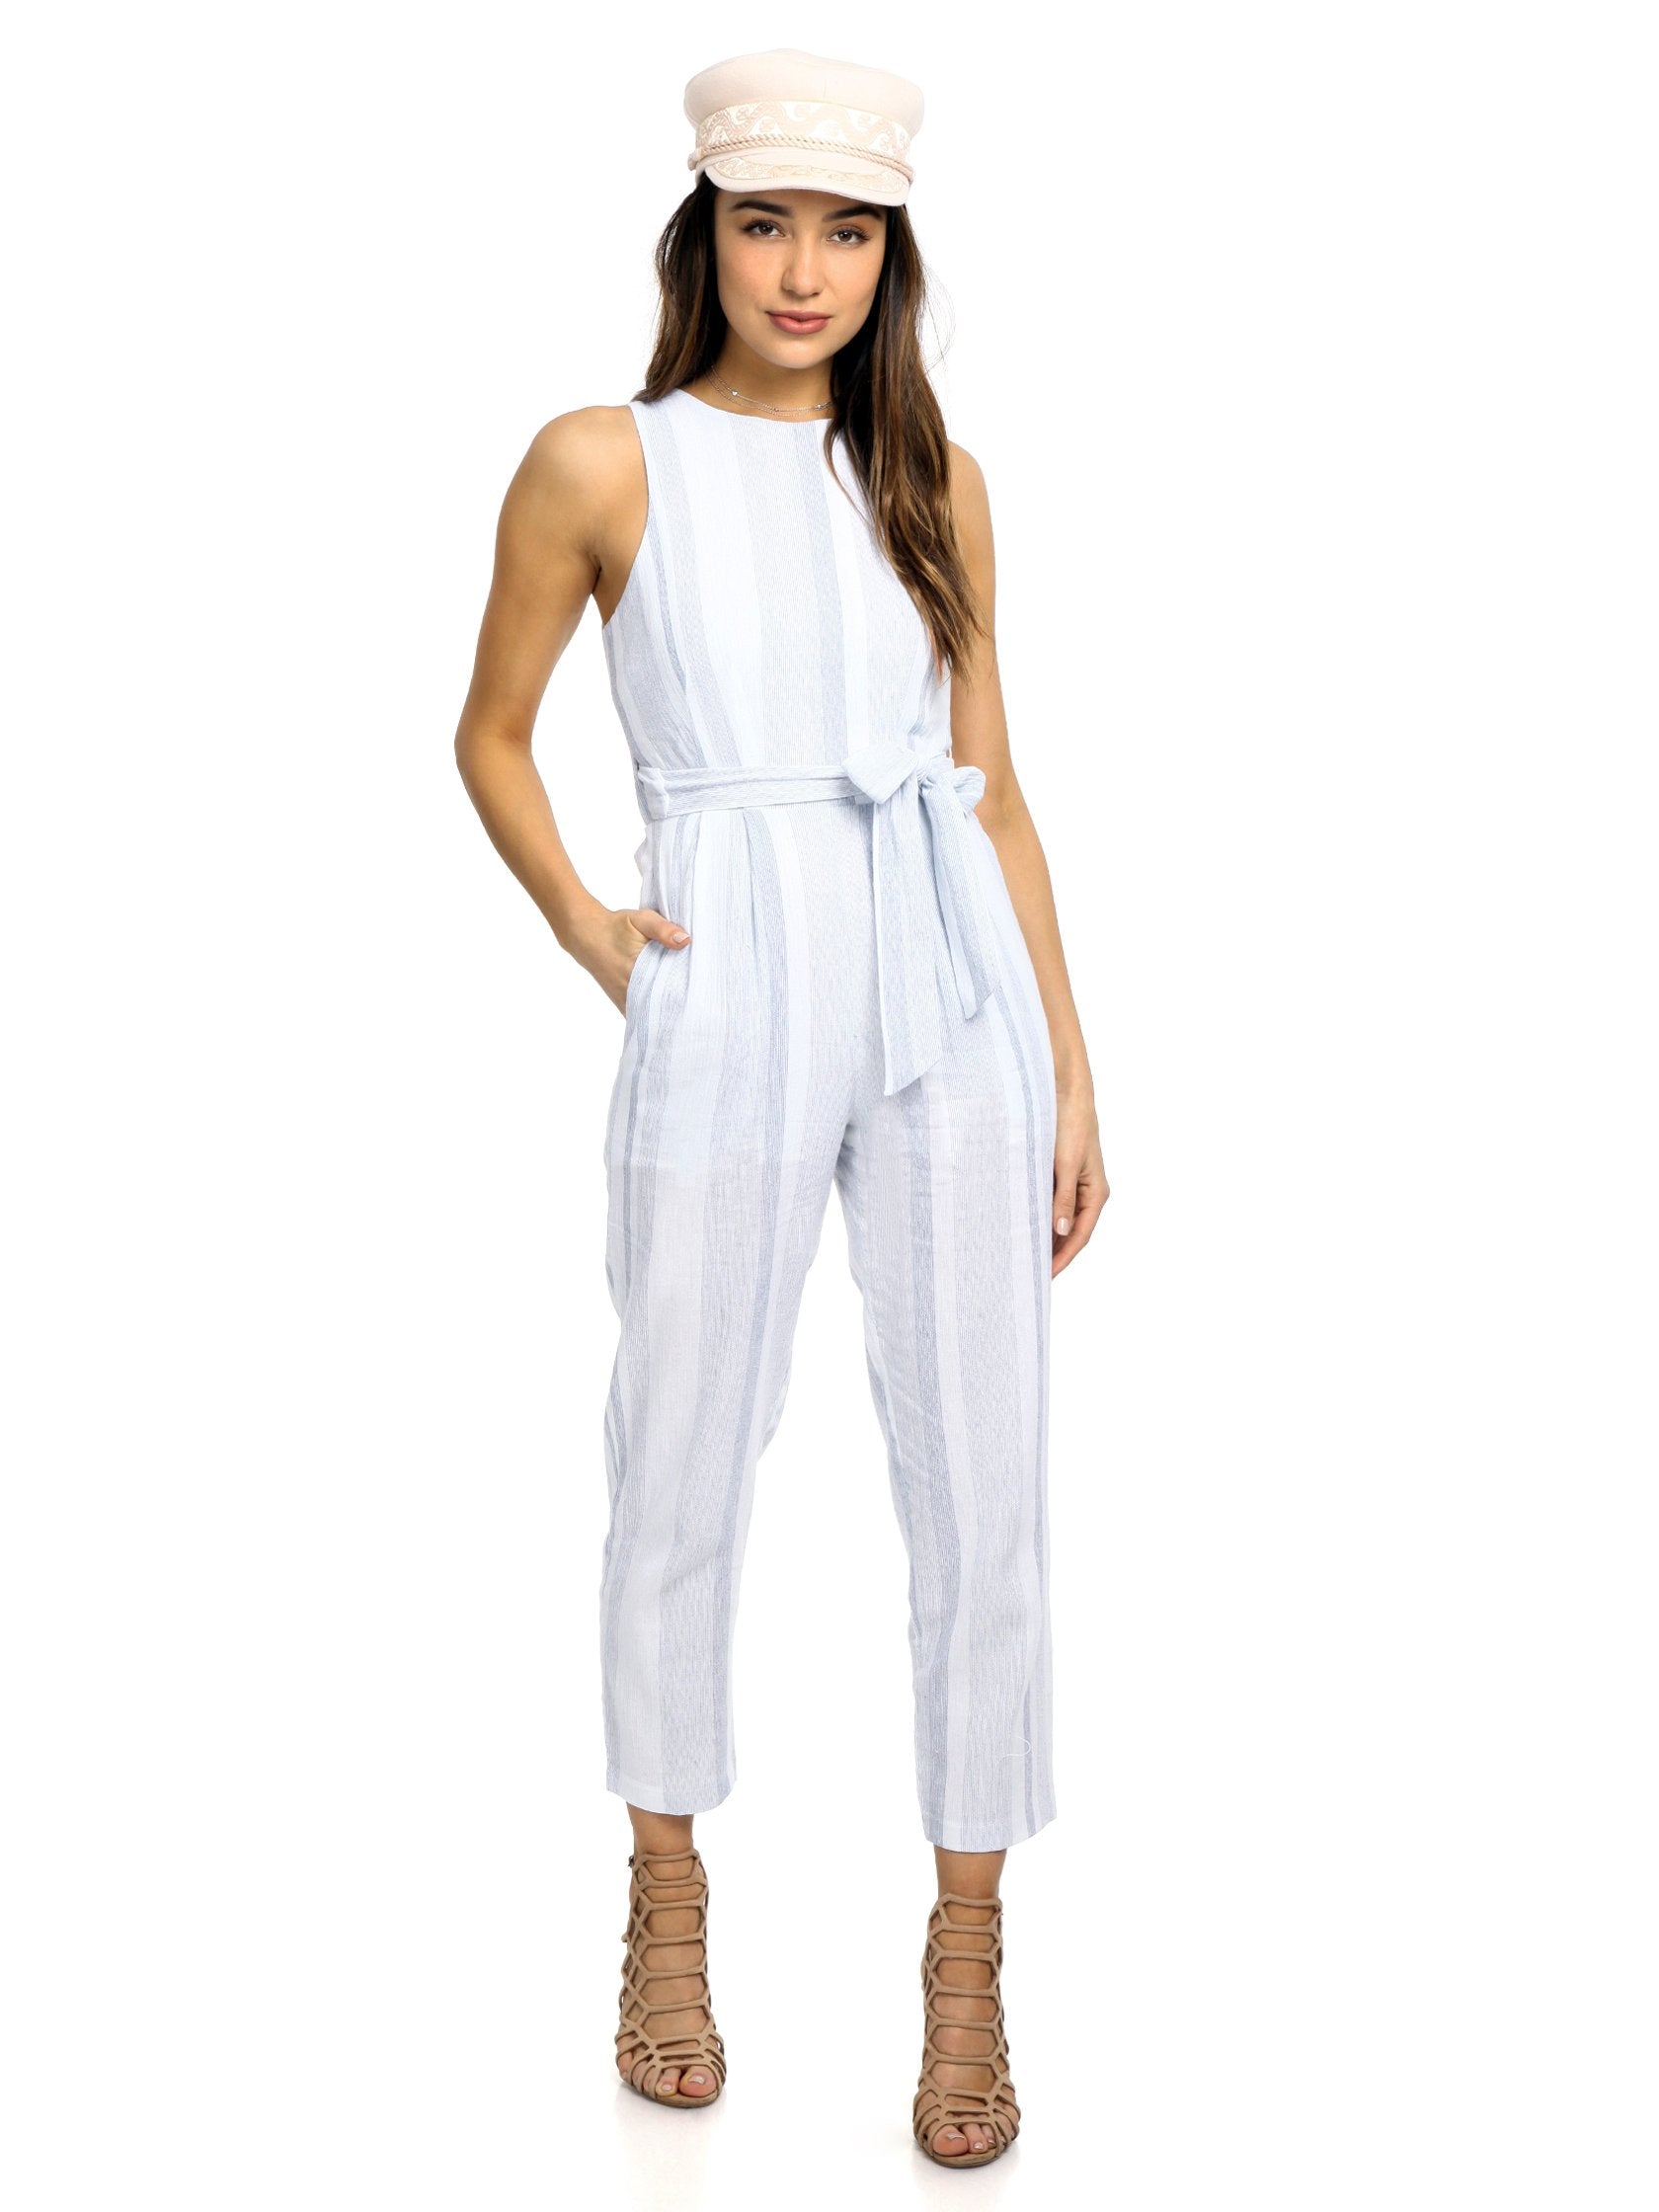 Girl outfit in a jumpsuit rental from ASTR called Presley Jumpsuit